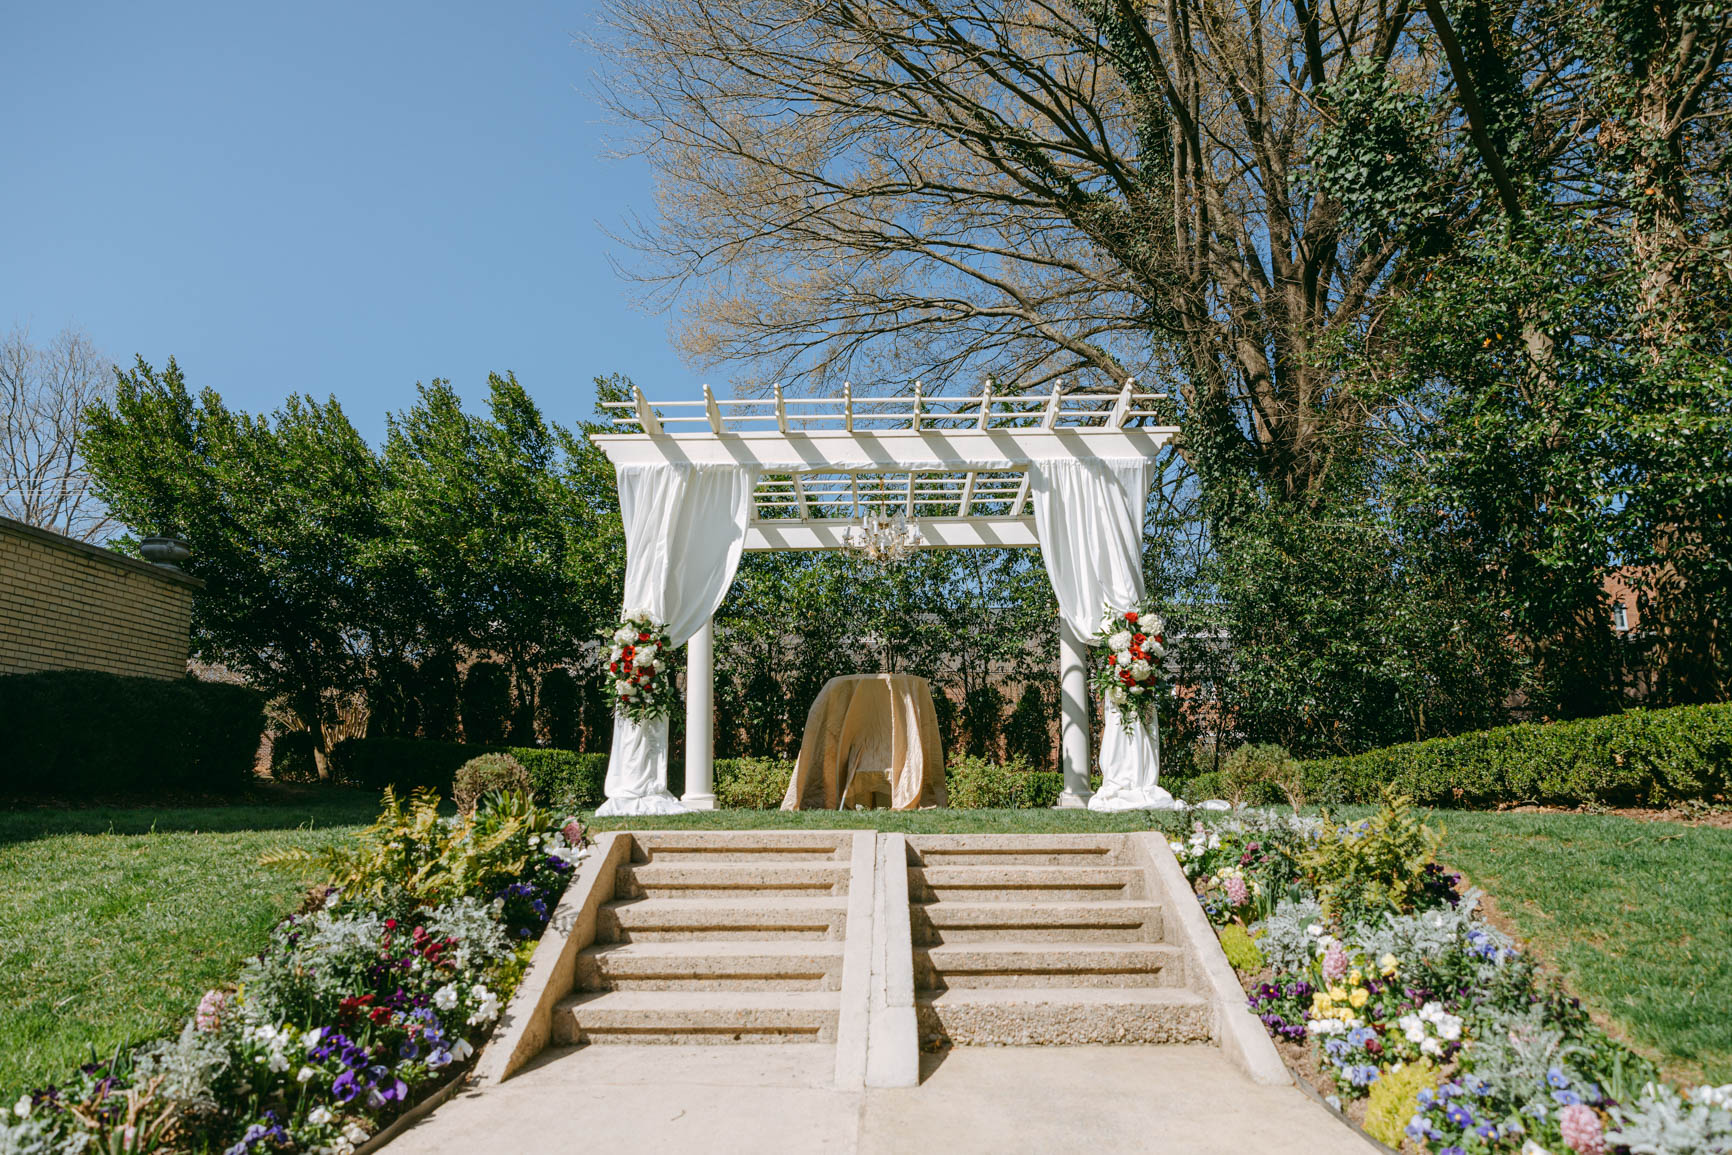 Wedding venue before ceremony at Separk Mansion in Gastonia NC shot by Nhieu Tang Photography | nhieutang.com